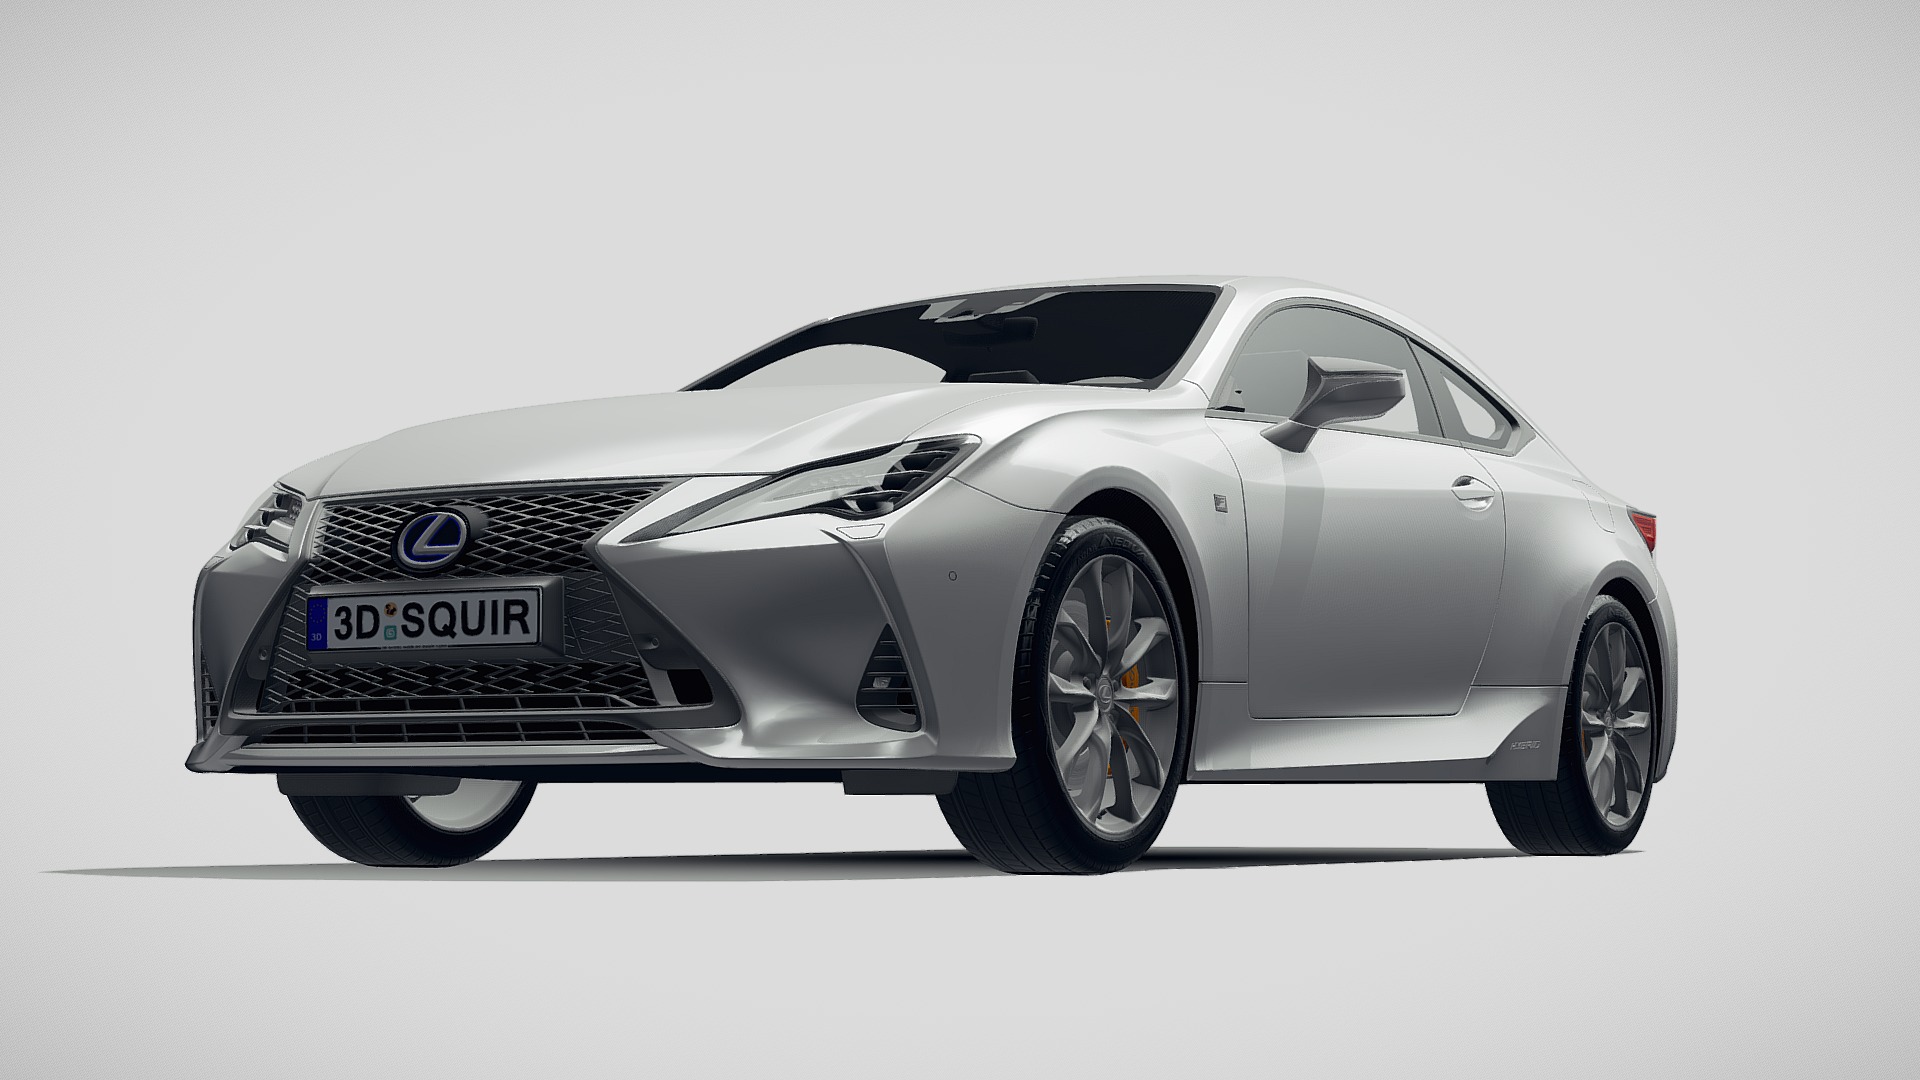 3D model Lexus RC 2019 - This is a 3D model of the Lexus RC 2019. The 3D model is about a silver sports car.